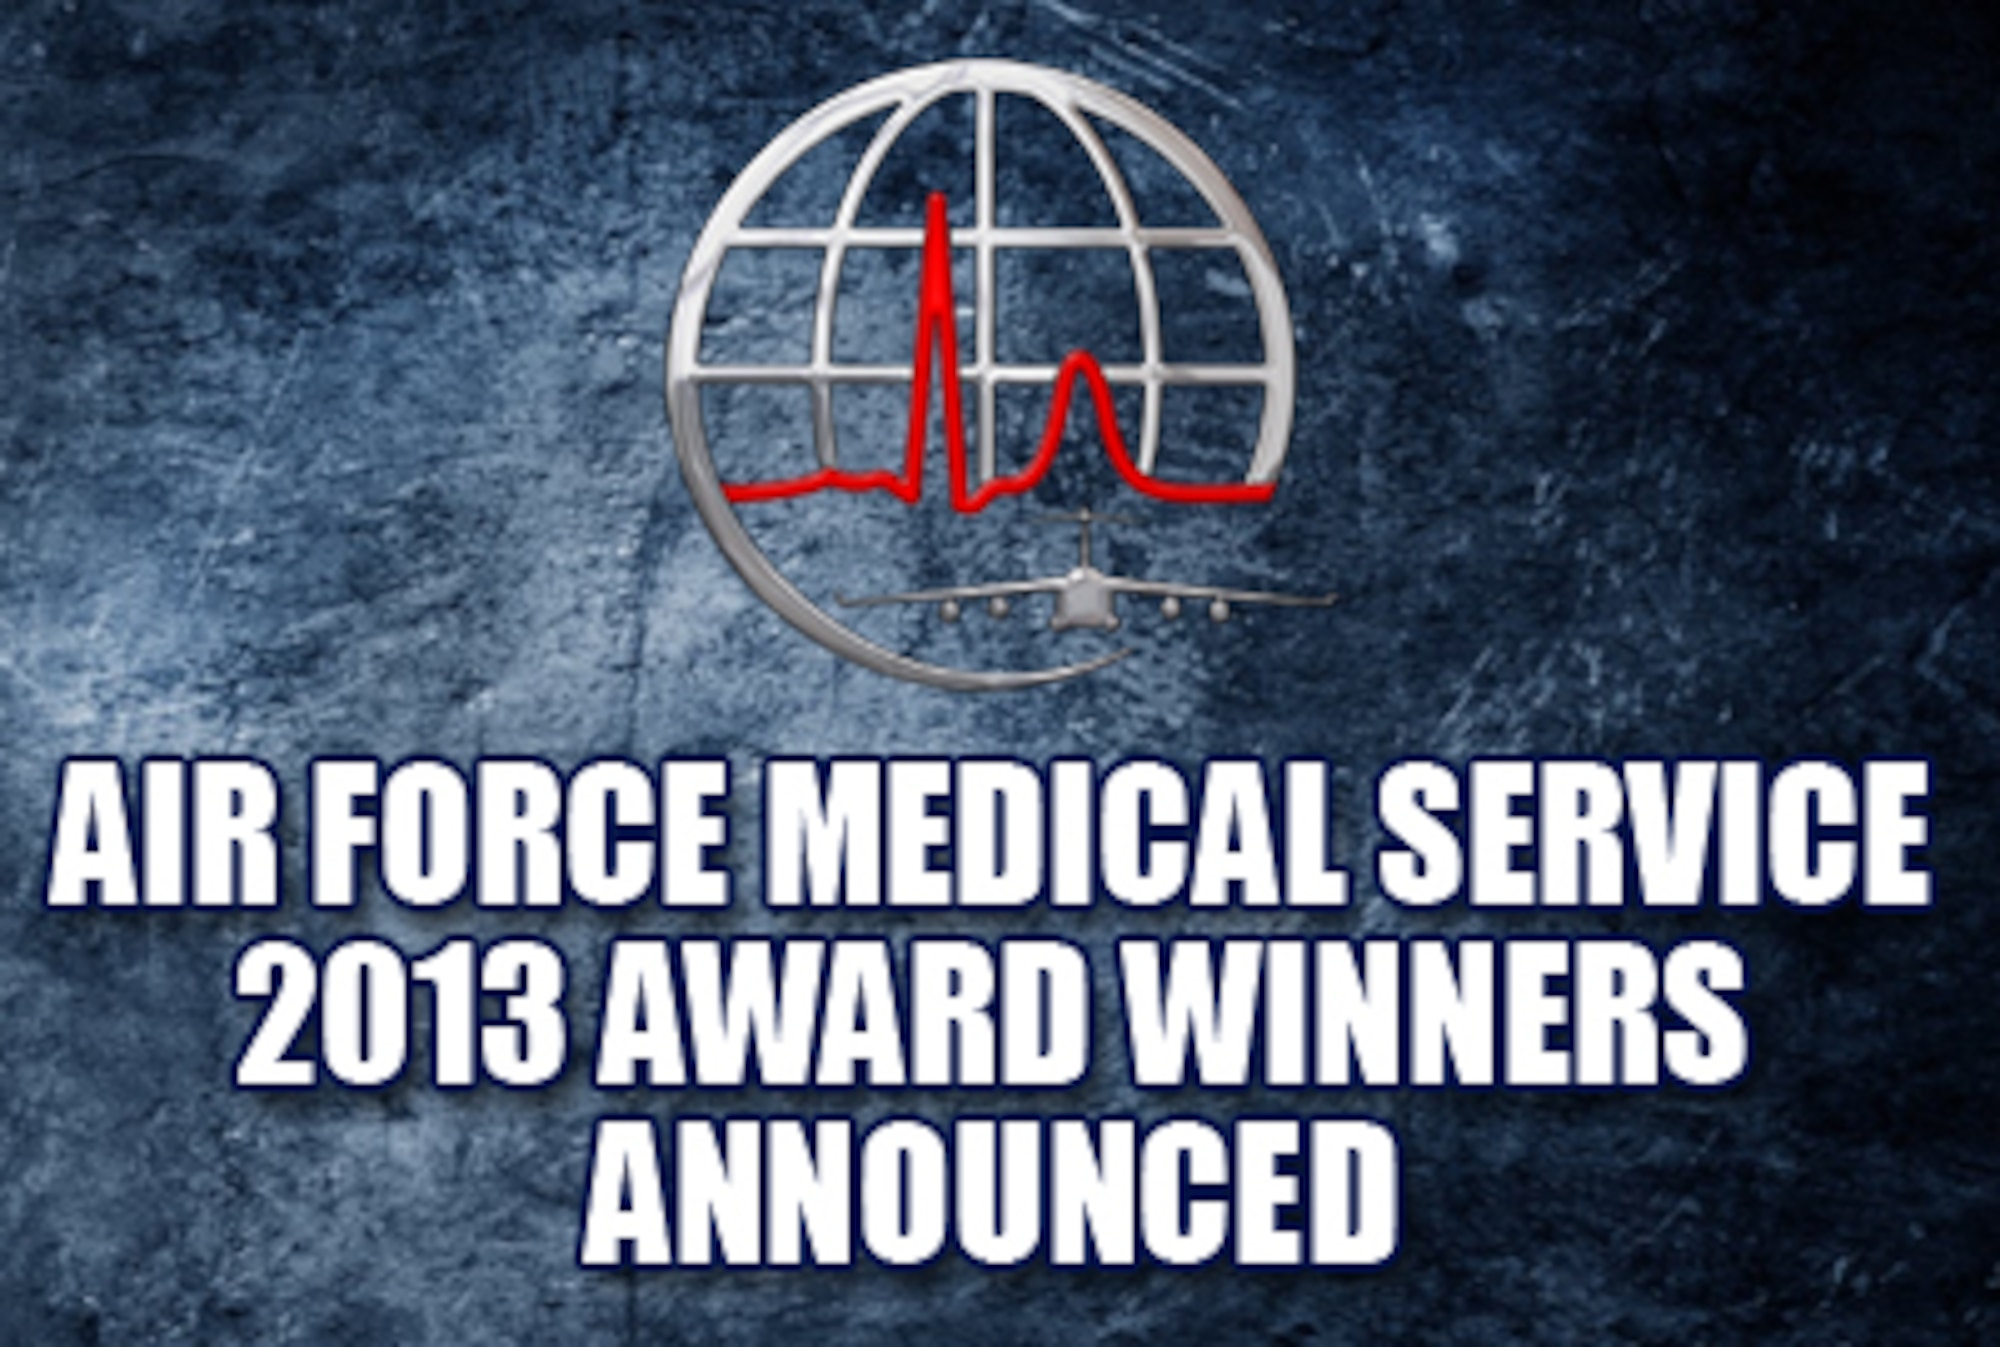 Air Force Medical Service 2013 award winners announced on Jan. 31, 2014. (U.S. Air Force graphic)